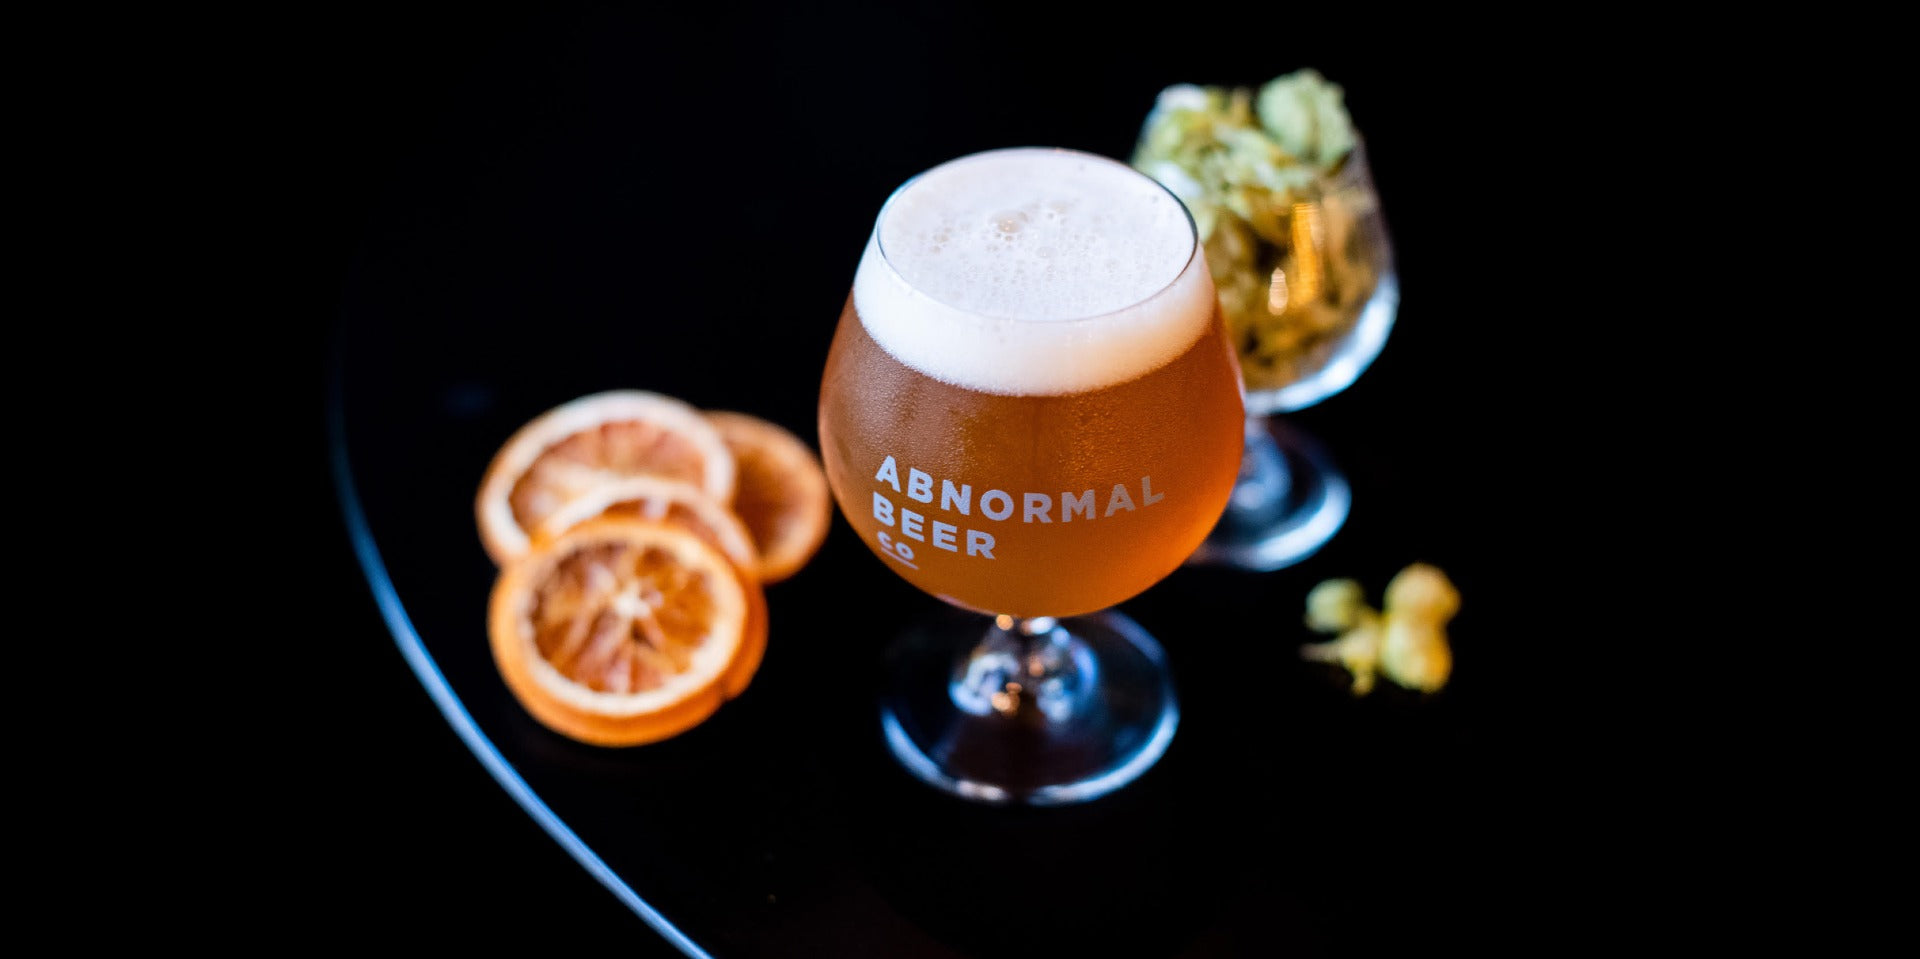 ABNORMAL BEER COMPANY,